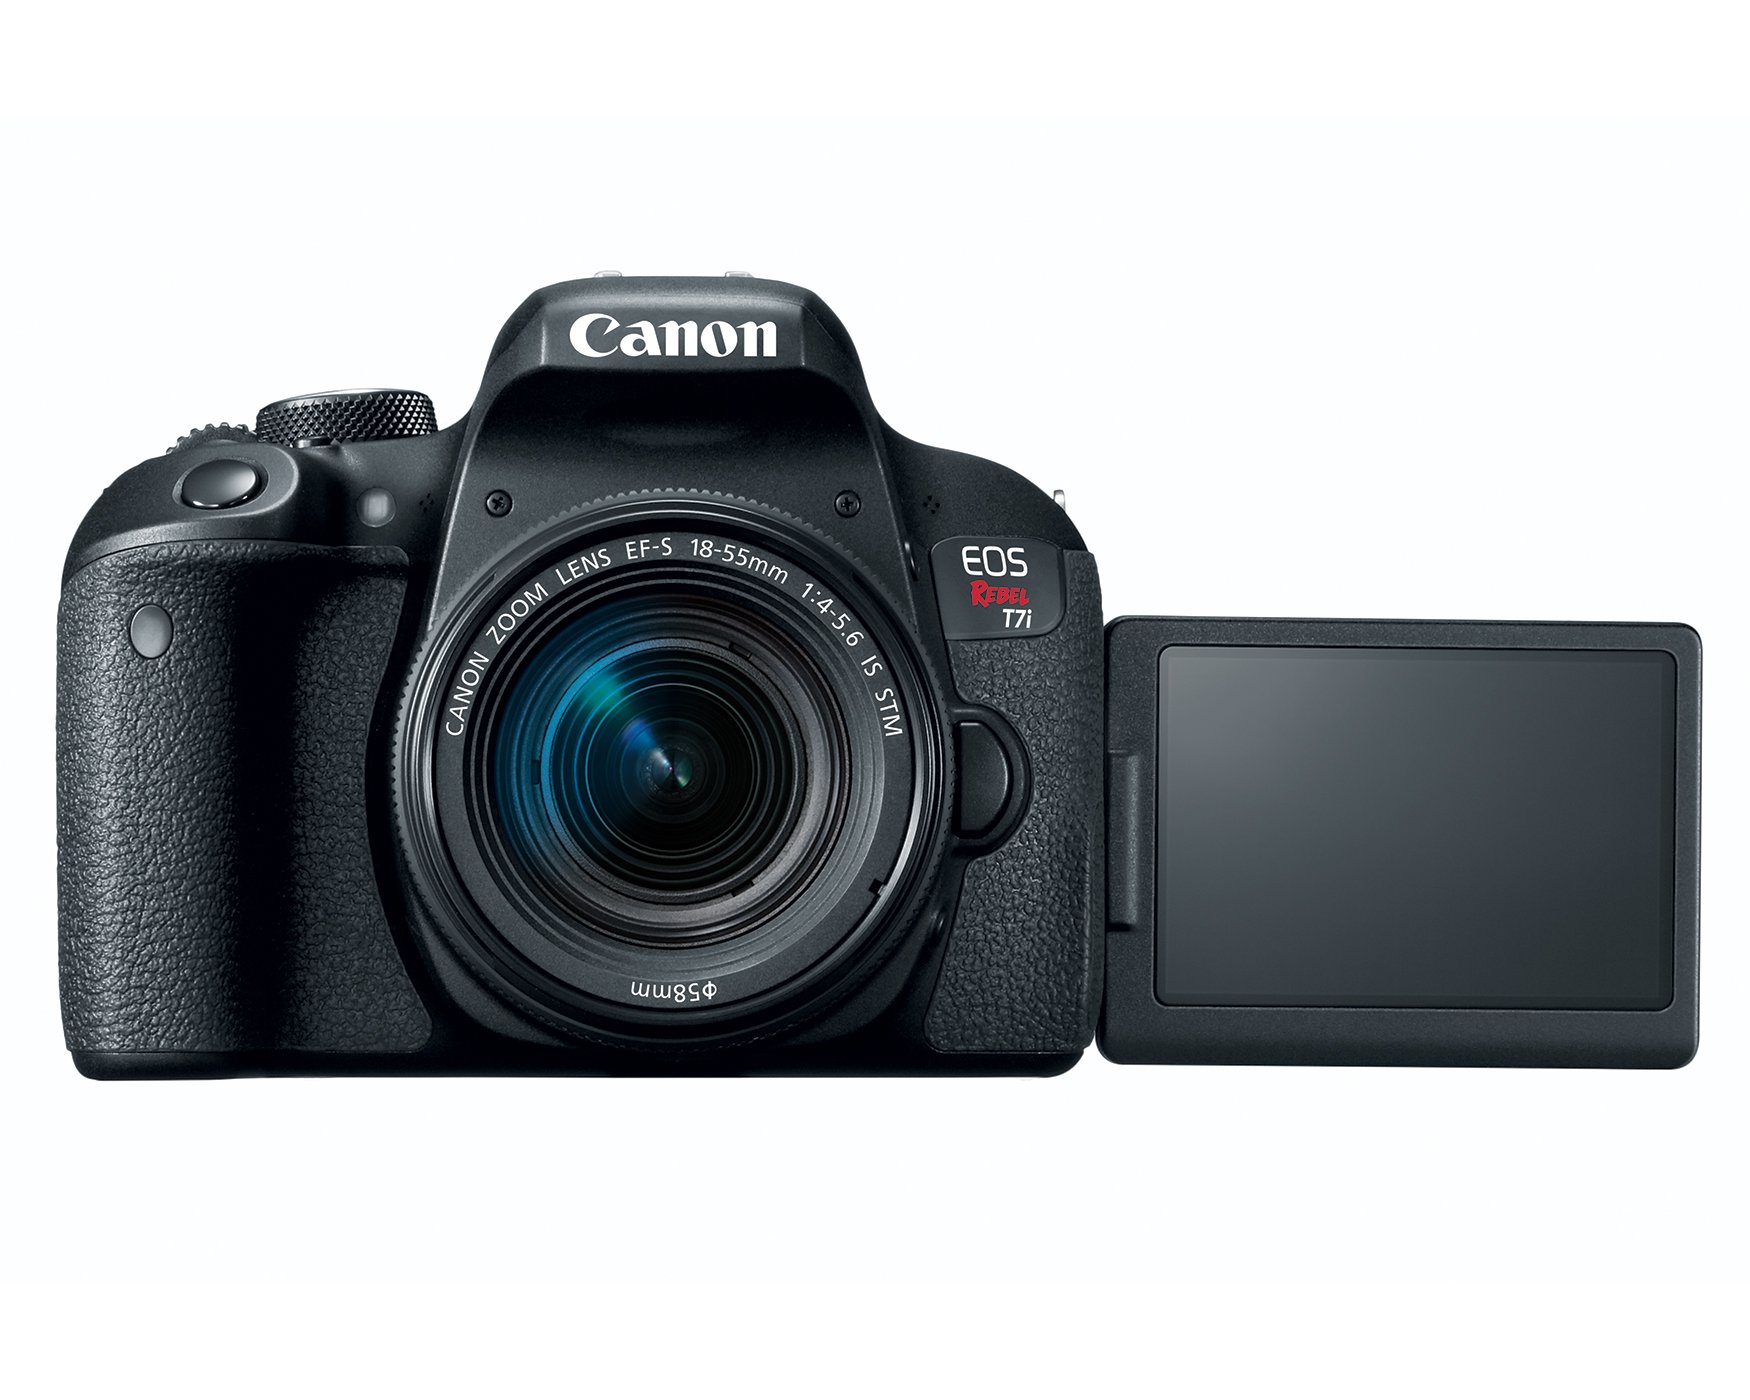 Canon EOS Rebel T7i DSLR Camera with 18-55mm Lens - image 5 of 7